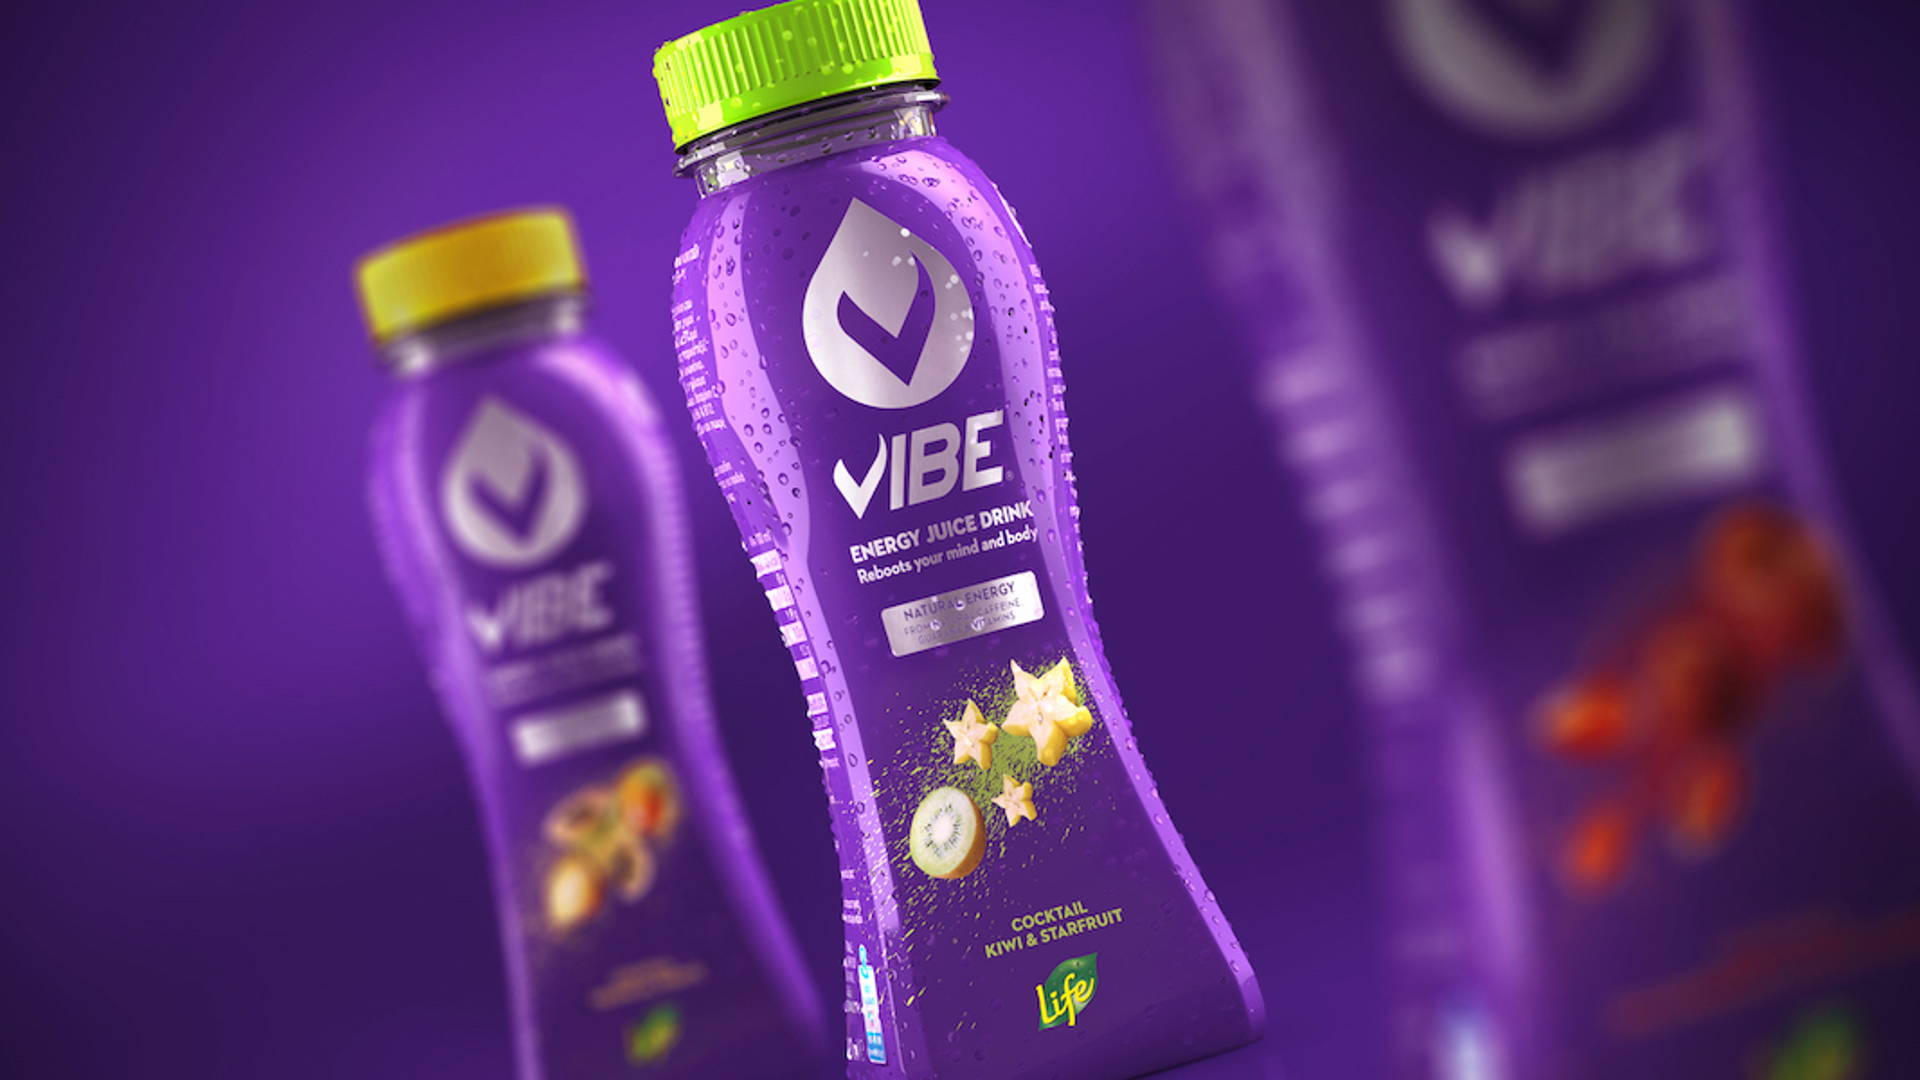 Featured image for Vibe Energy Juice Drink